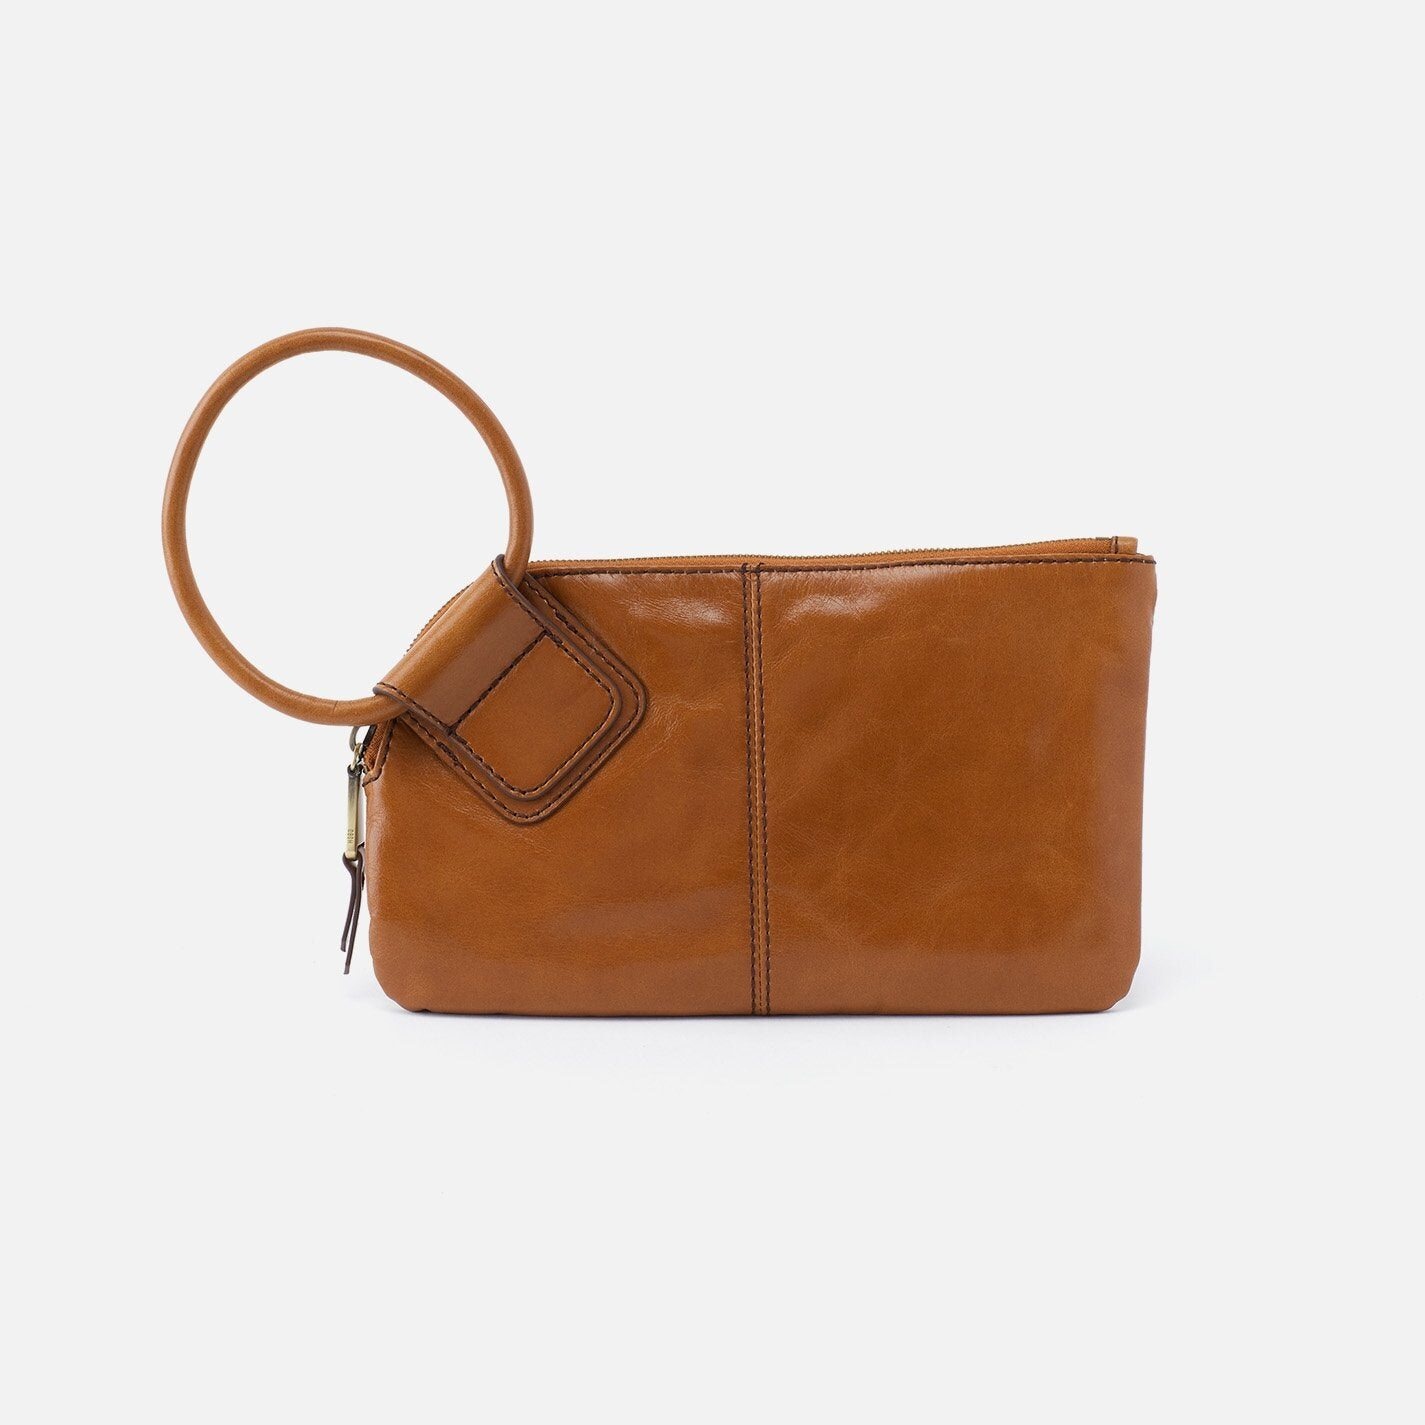 Hobo Sable Wristlet in Truffle - Her Hide Out